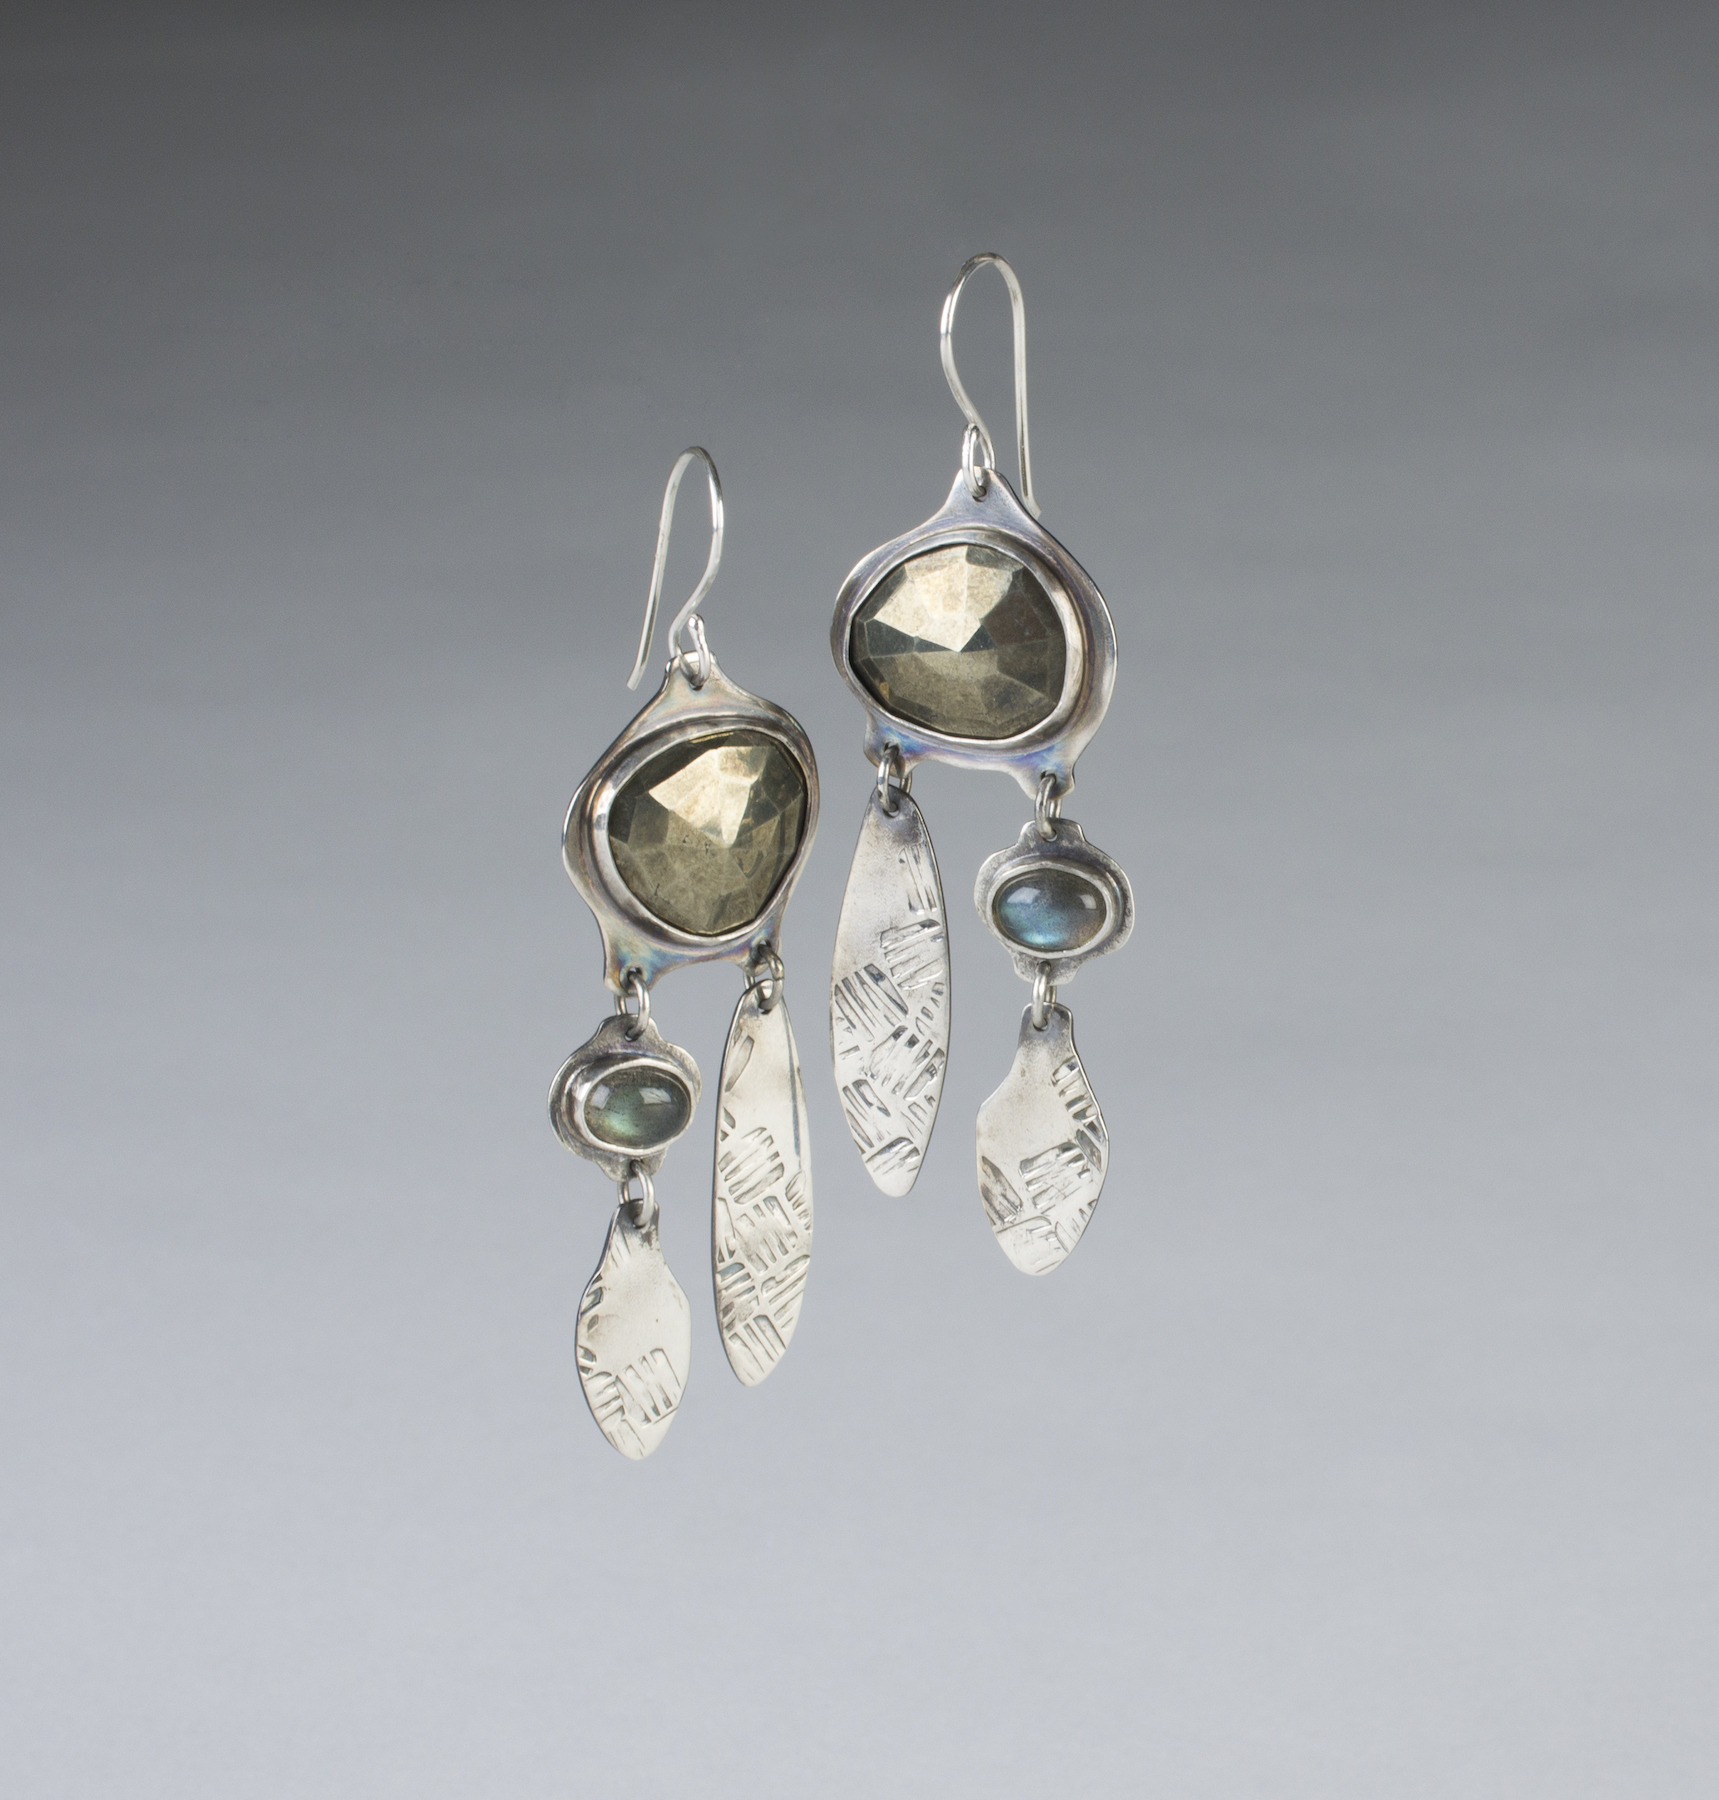 student made dangle earrings with gemstones and silver